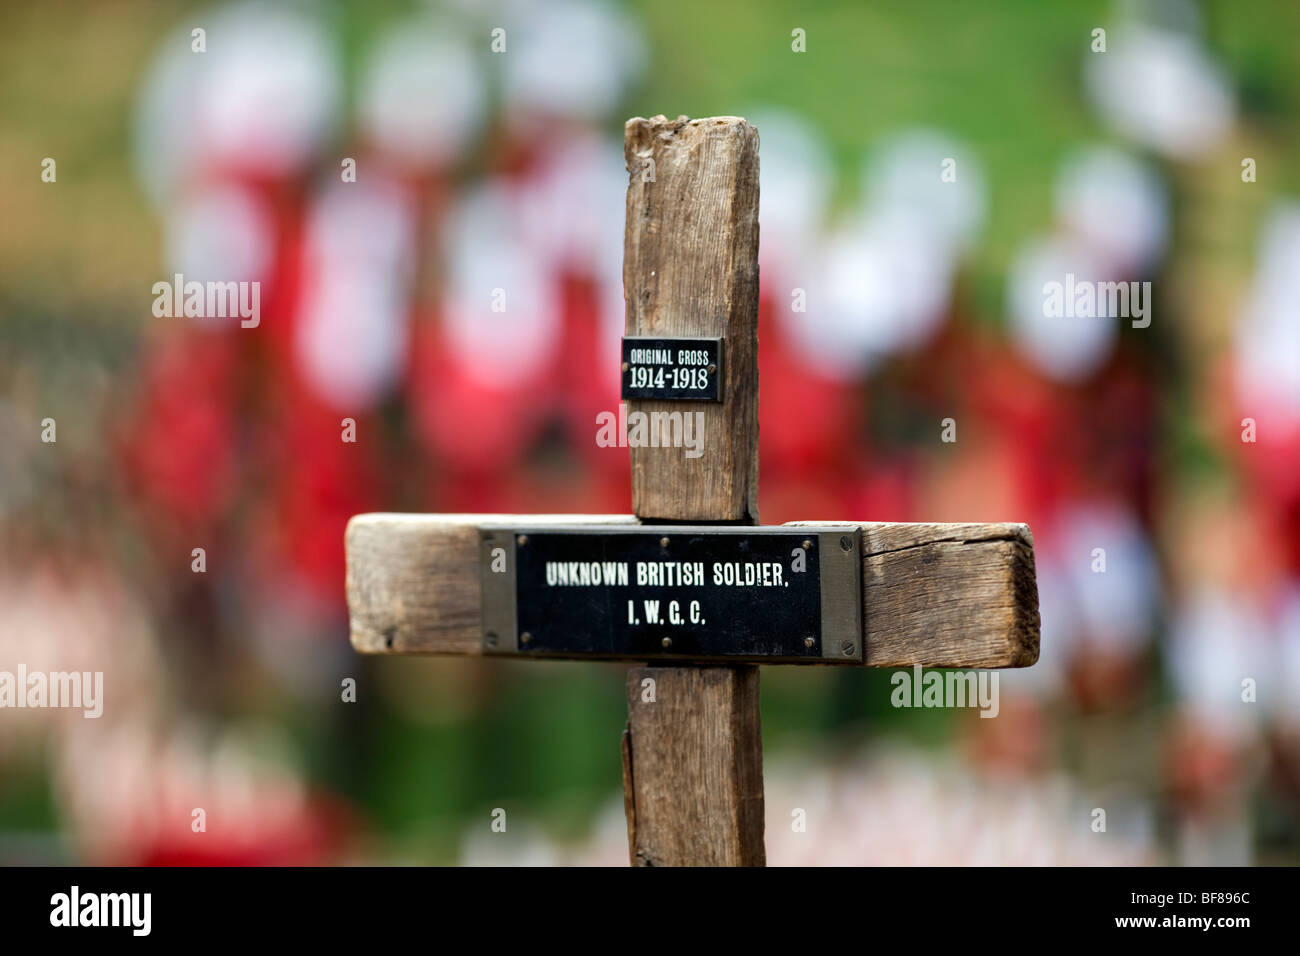 One of the original wooden crosses from WW1 used to mark the grave of an unknown British soldier Stock Photo